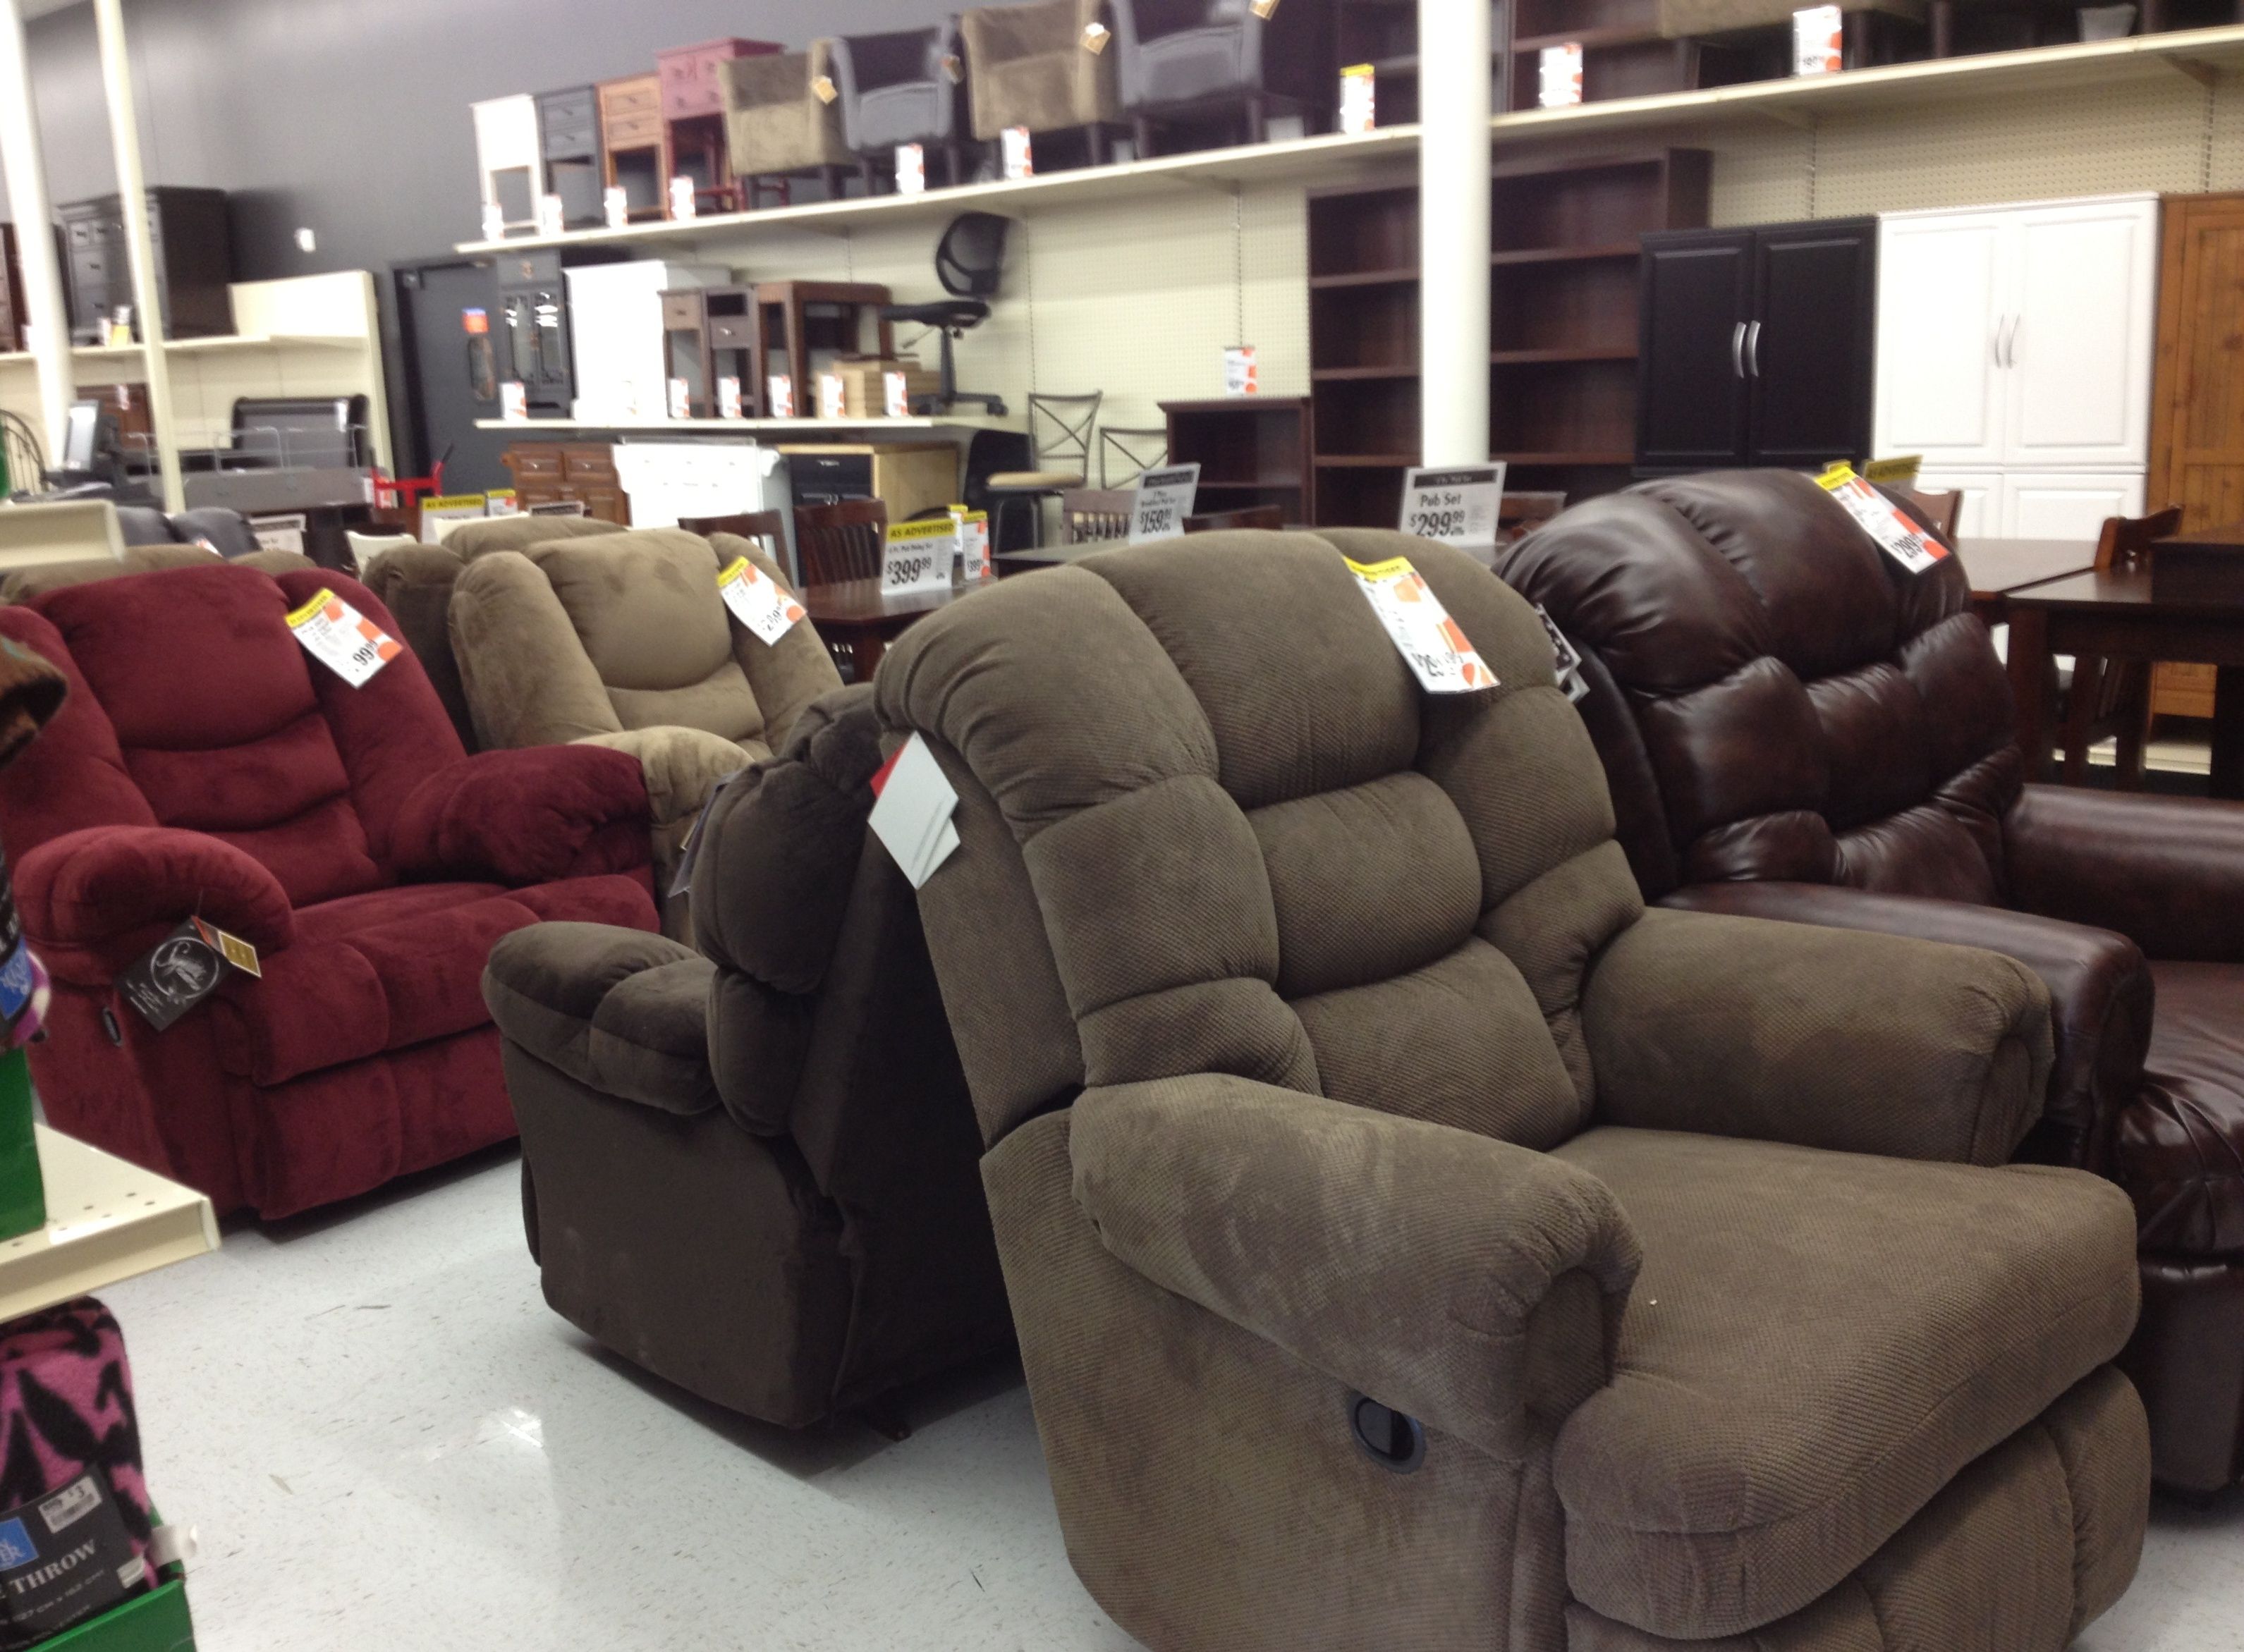 40 Big Lots Sofas Big Lots Furniture Sectional Sofas On White And Throughout Big Lots Sofas (View 8 of 15)